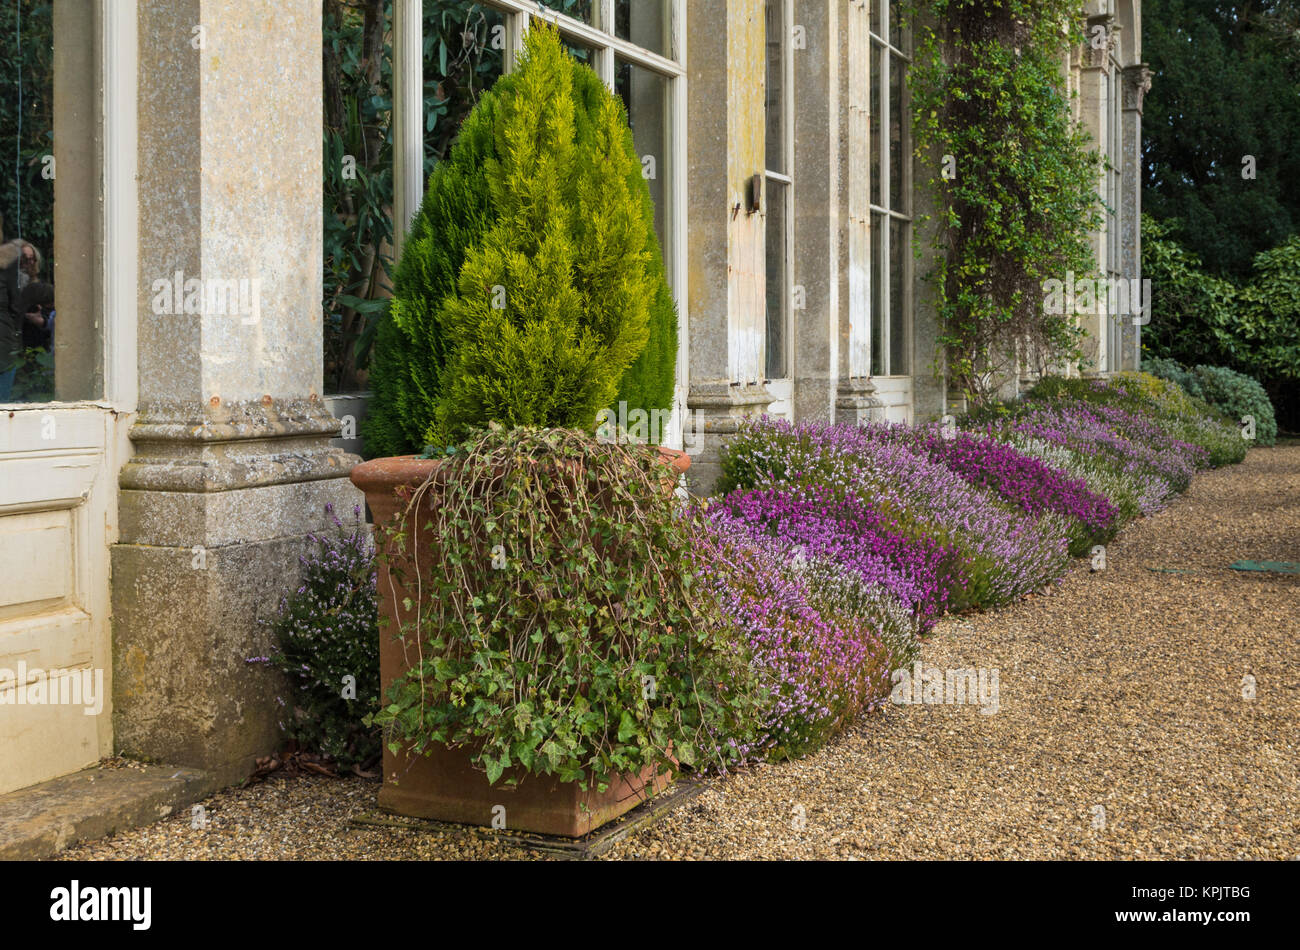 Large terracotta pot containing evergreen shrubs with a border of Winter flowering heathers behind; outside the Orangery, Castle Ashby Gardens, UK Stock Photo